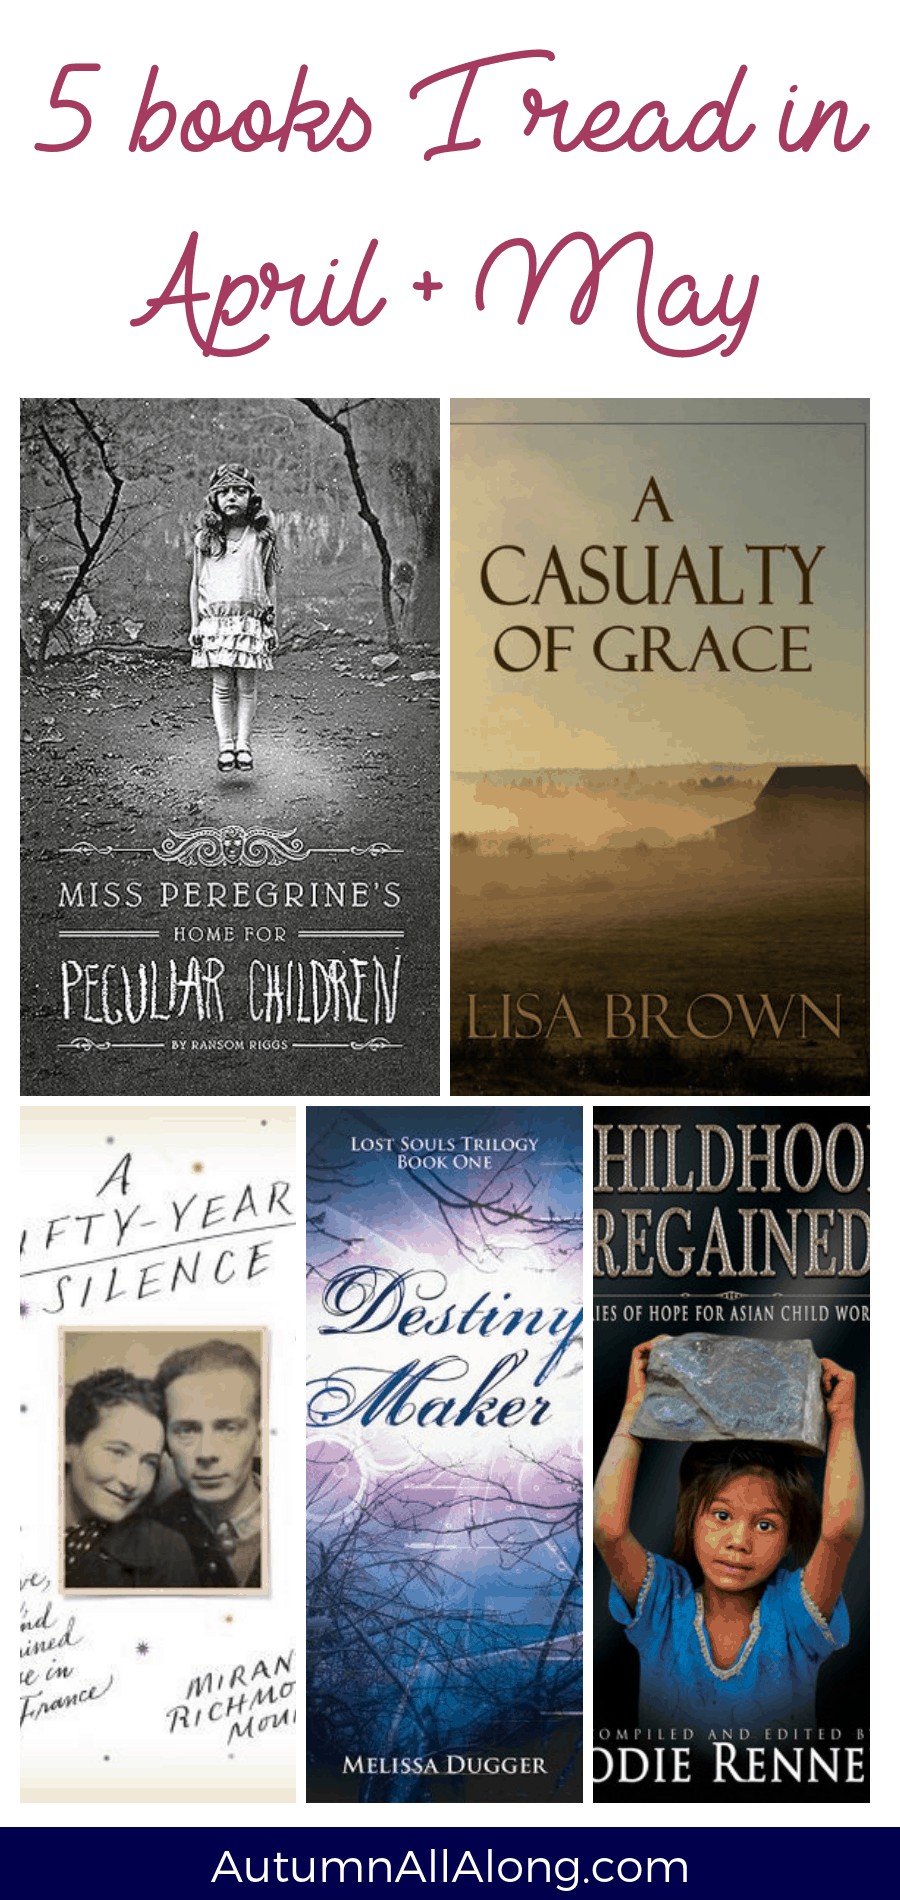 April and May bookshelf updates// what did I read this month? Reviews on: A Fifty-Year Silence: Love, War, and a Ruined House in France; Destiny Maker: Lost Souls Trilogy Book One; Miss Peregrine's Peculiar Children Boxed Set; & Childhood Regained: Stories of Hope for Asian Child Workers | via Autumn All Along